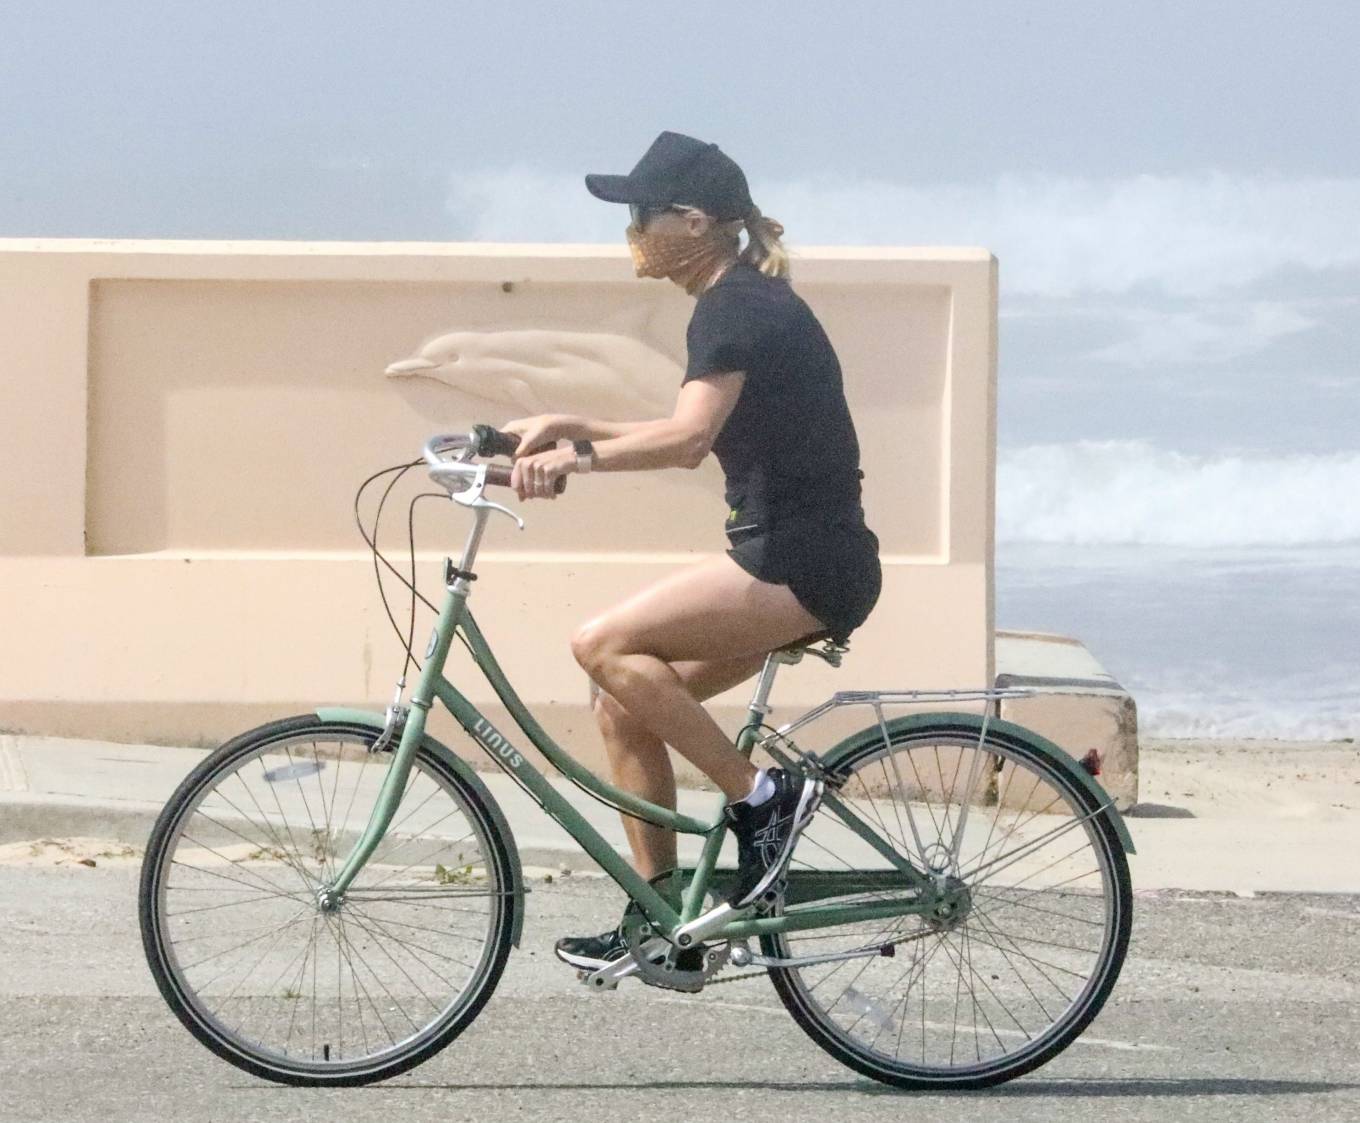 Reese Witherspoon â€“ Riding a bicycle while her husband jog